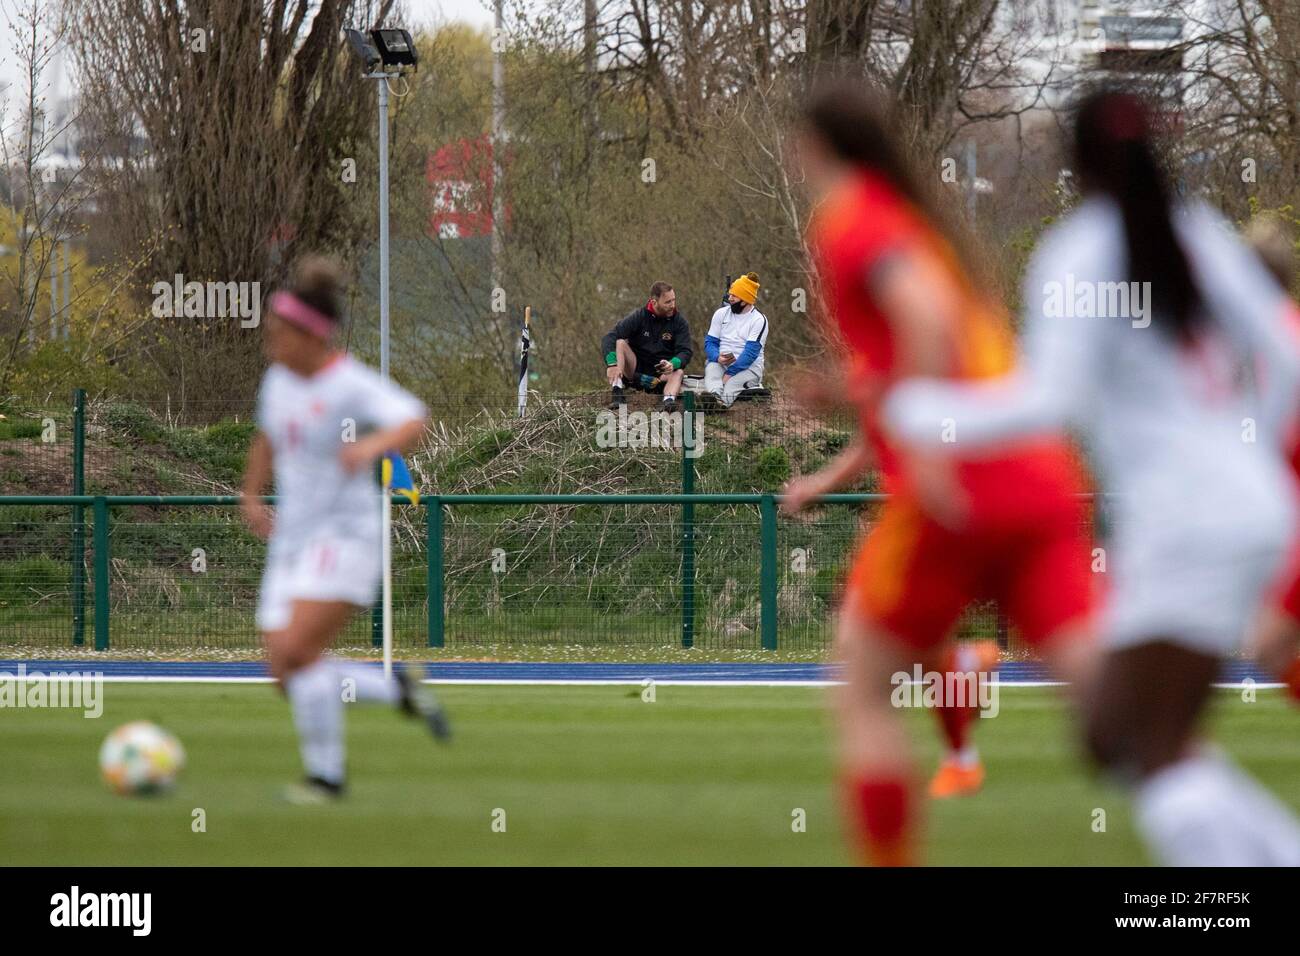 Cardiff, Wales, UK. 9th Apr, 2021. People watch from a mound outside the perimeter fence during the behind- closed-doors friendly international match between Wales Women and Canada Women at Leckwith Stadium in Cardiff. Credit: Mark Hawkins/Alamy Live News Stock Photo